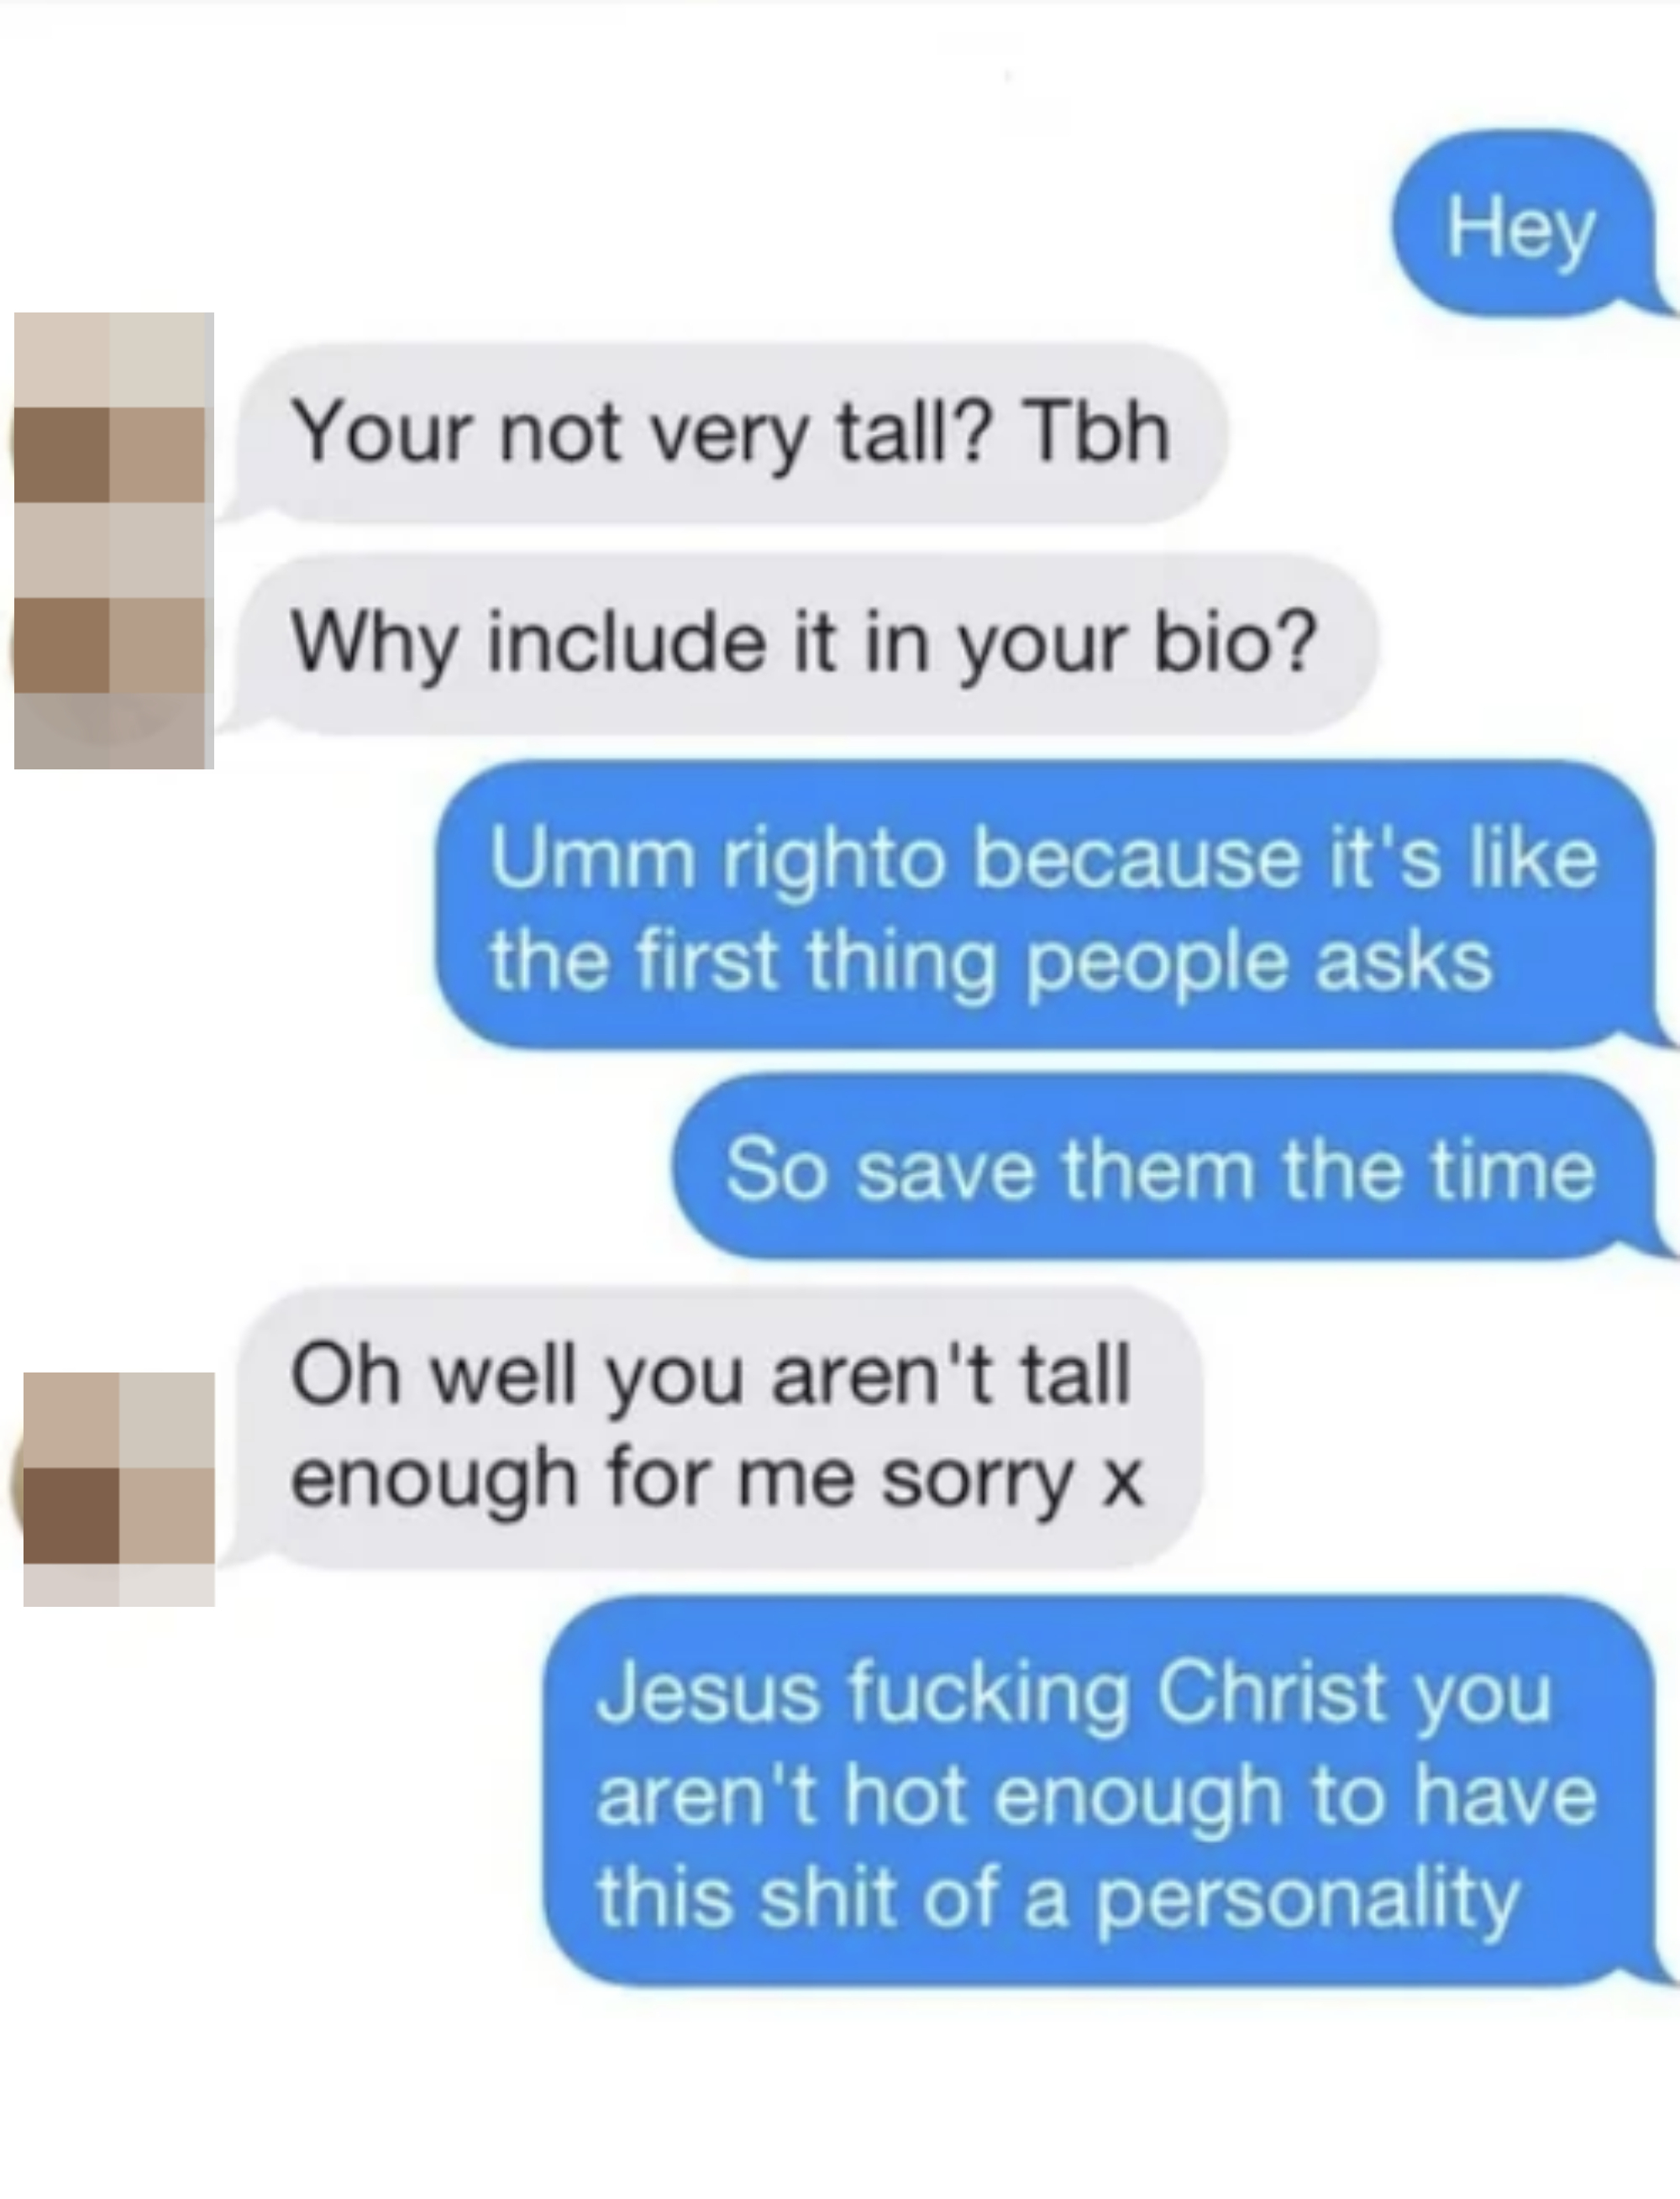 woman asks person why they included their height if they&#x27;re not that tall and then says they&#x27;re not tall enough